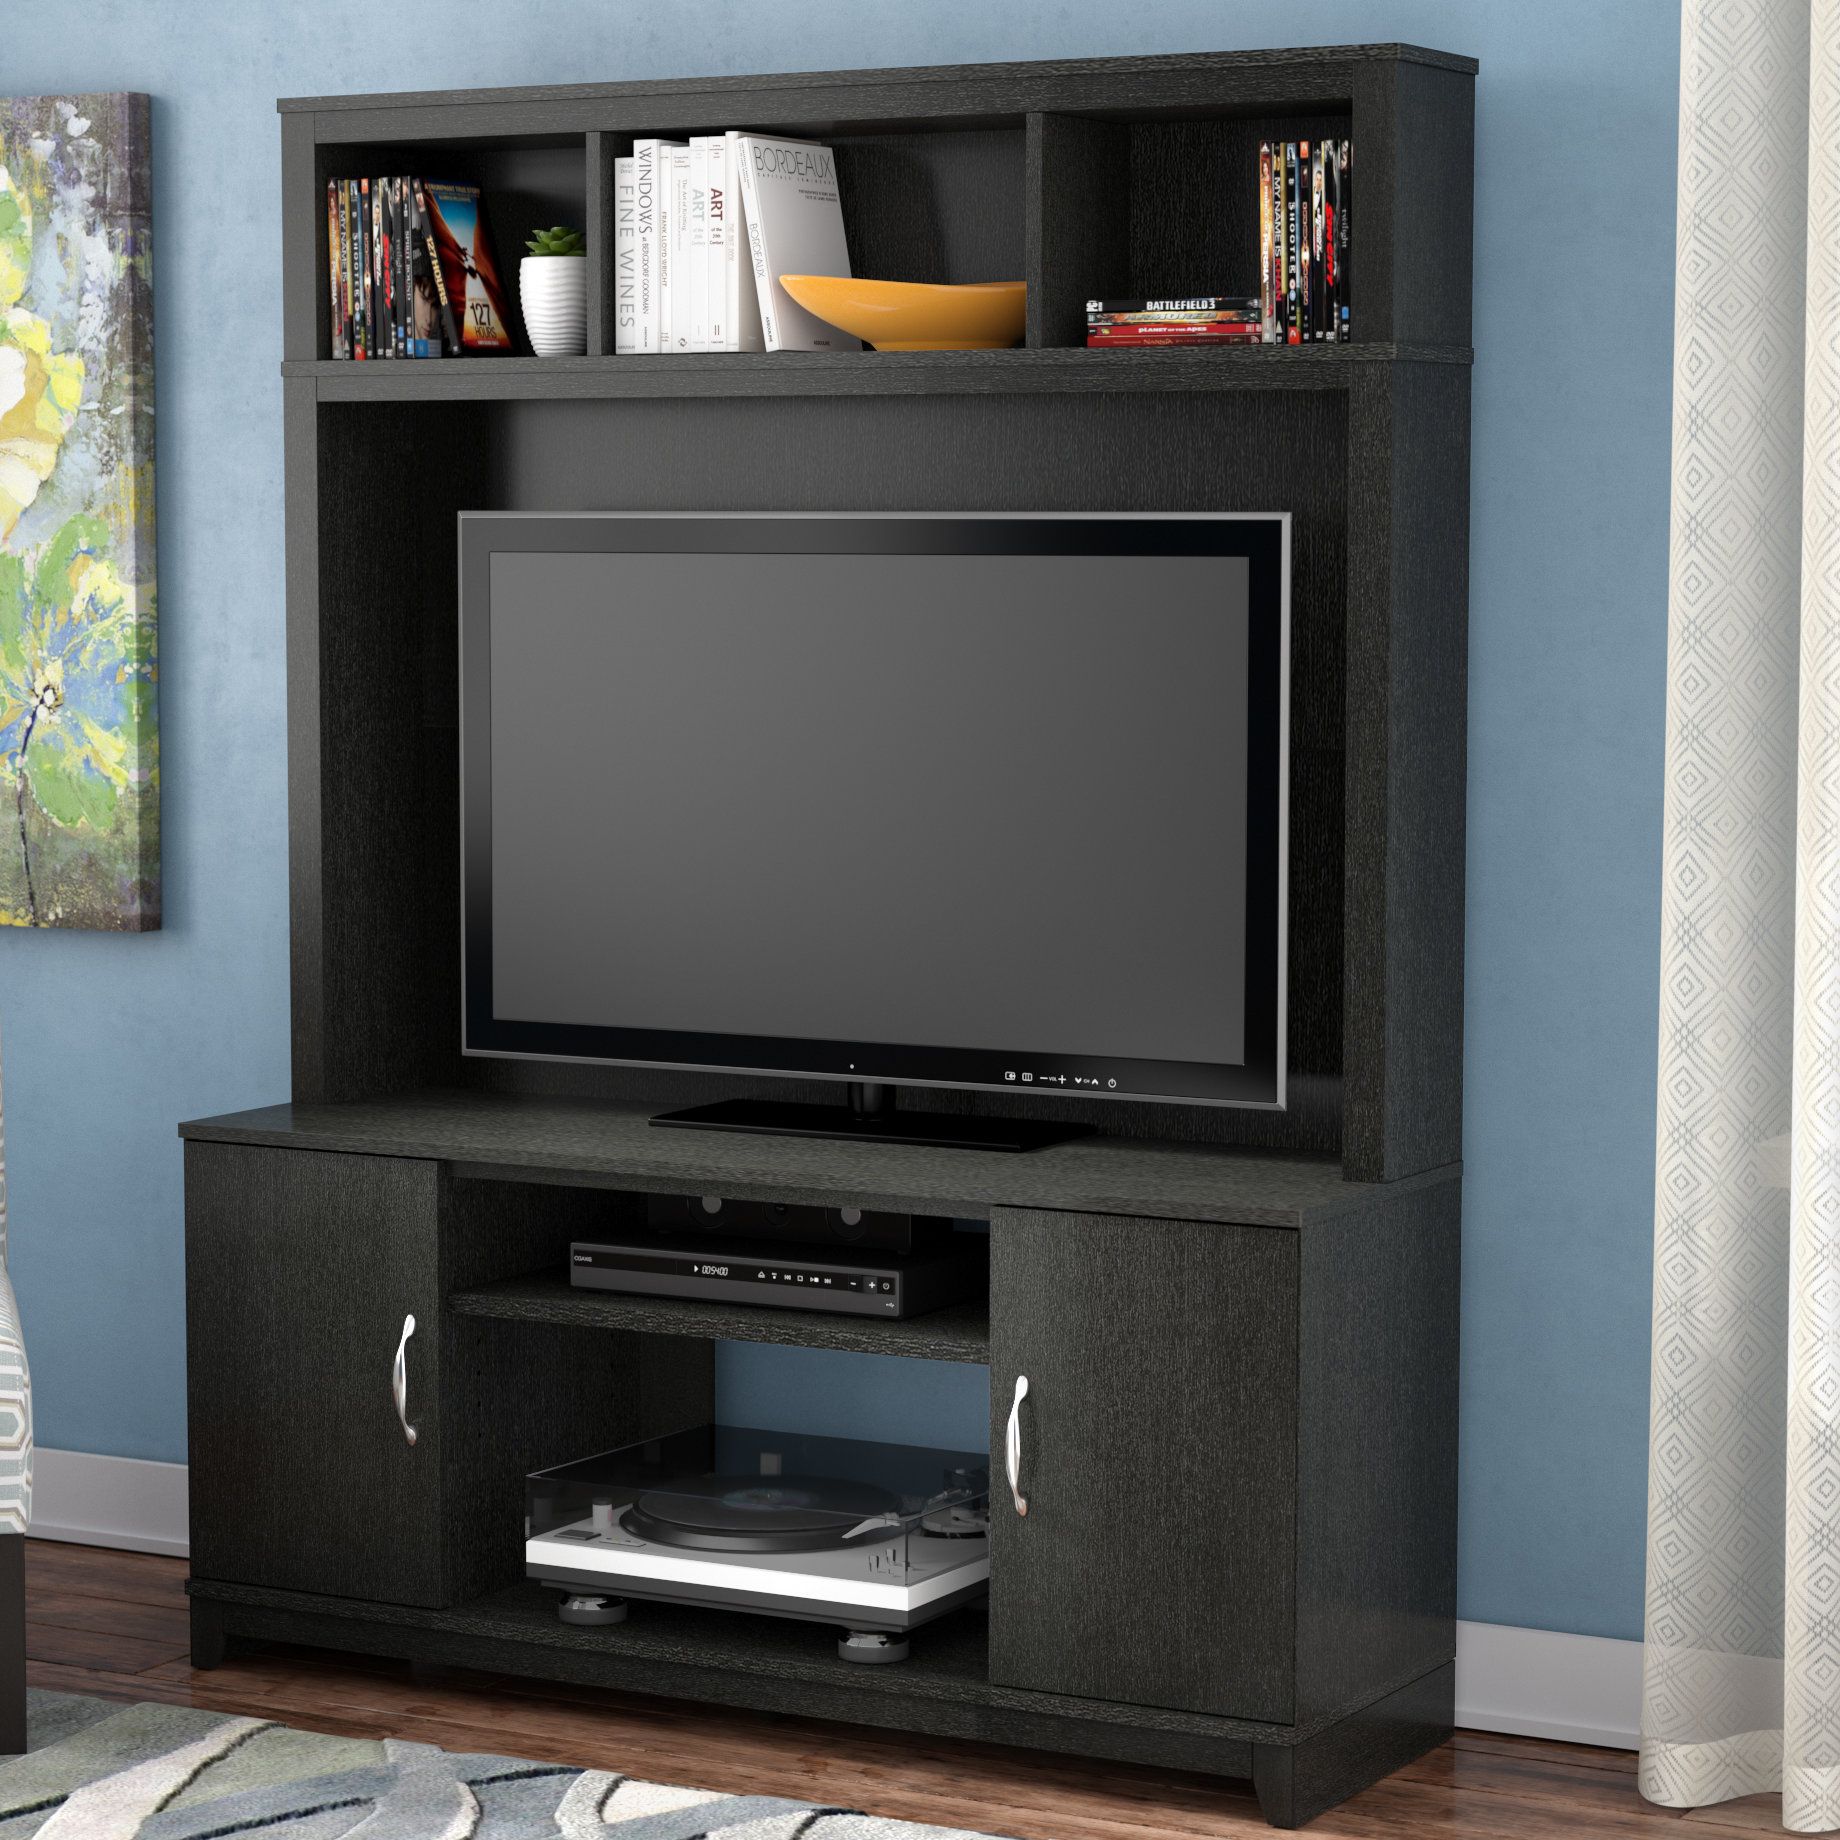 Tv Stands With Hutch You'll Love | Wayfair Within Kilian Grey 49 Inch Tv Stands (View 1 of 30)